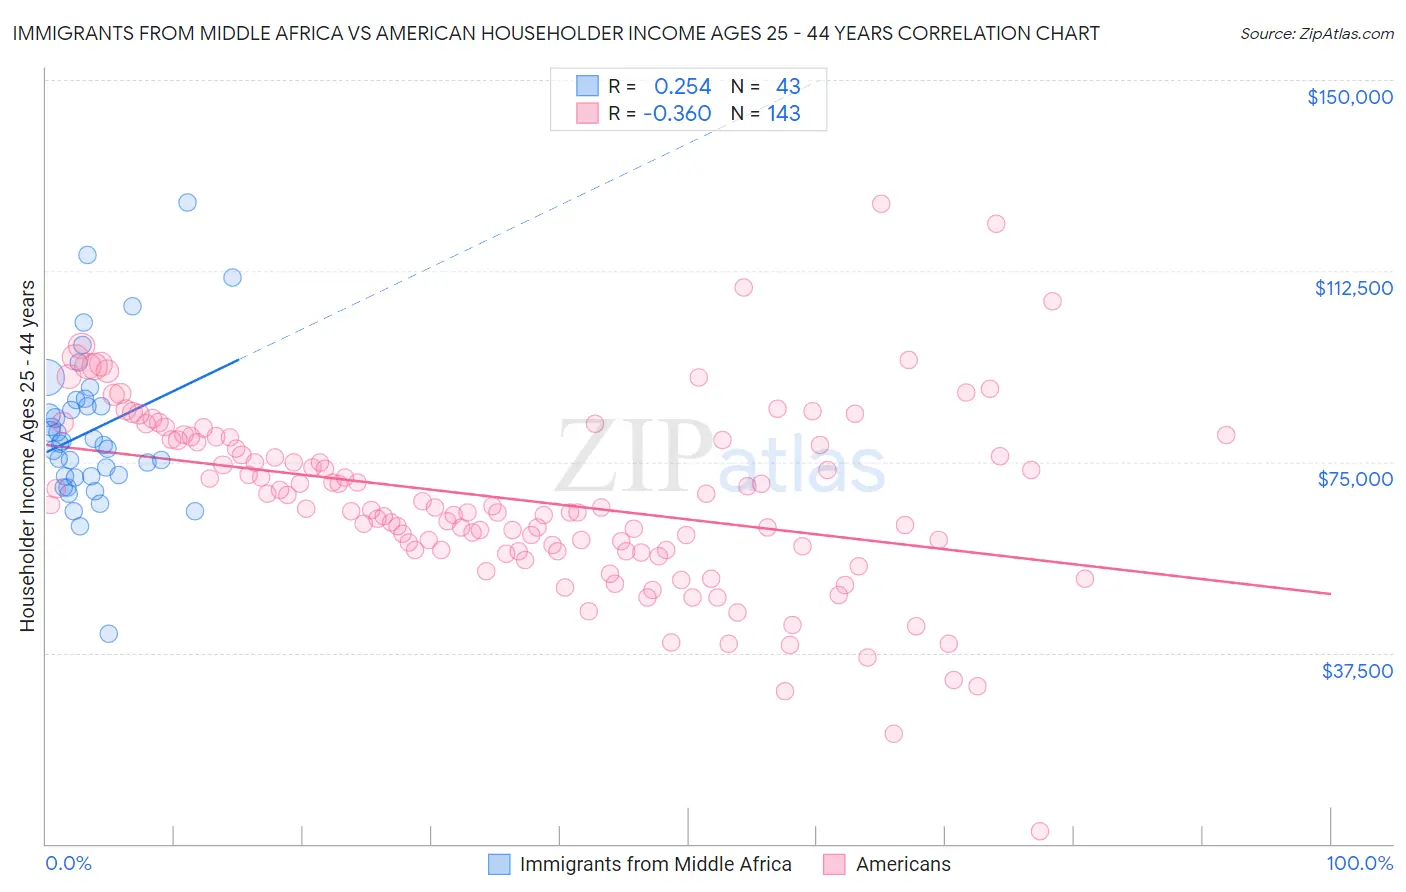 Immigrants from Middle Africa vs American Householder Income Ages 25 - 44 years